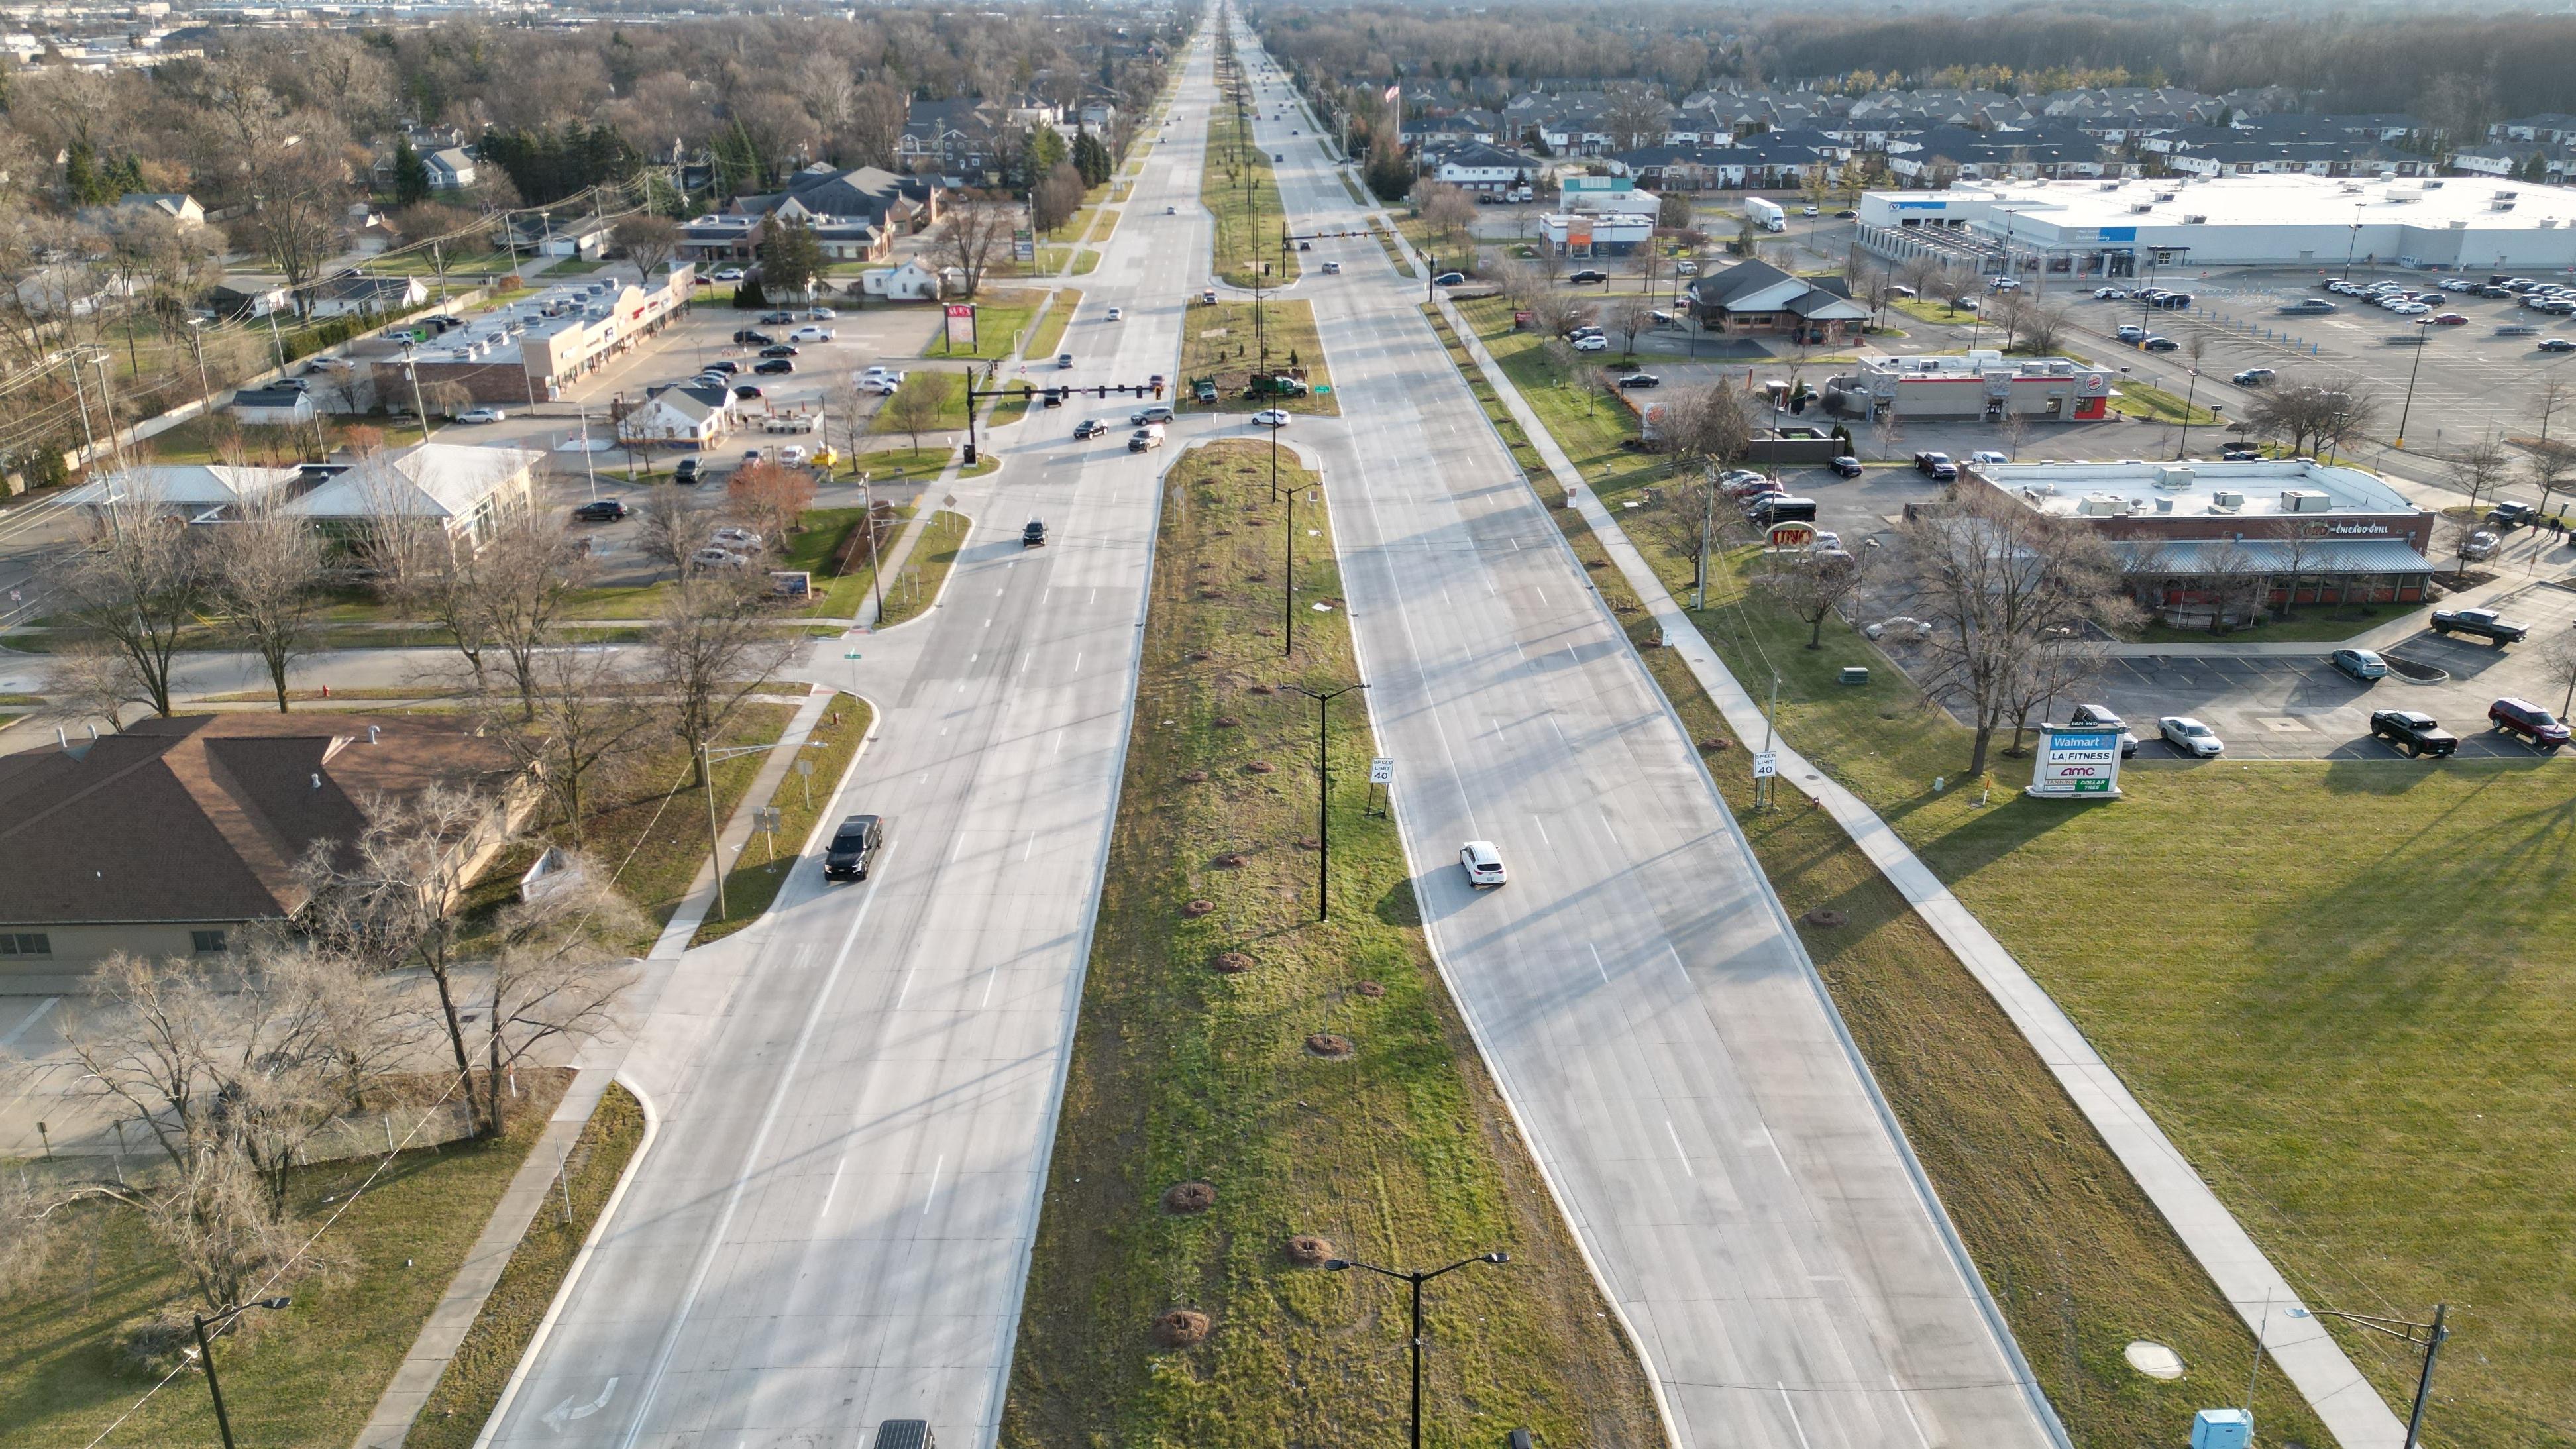 Mound Road aerial view from 18 Mile Road to M-59.